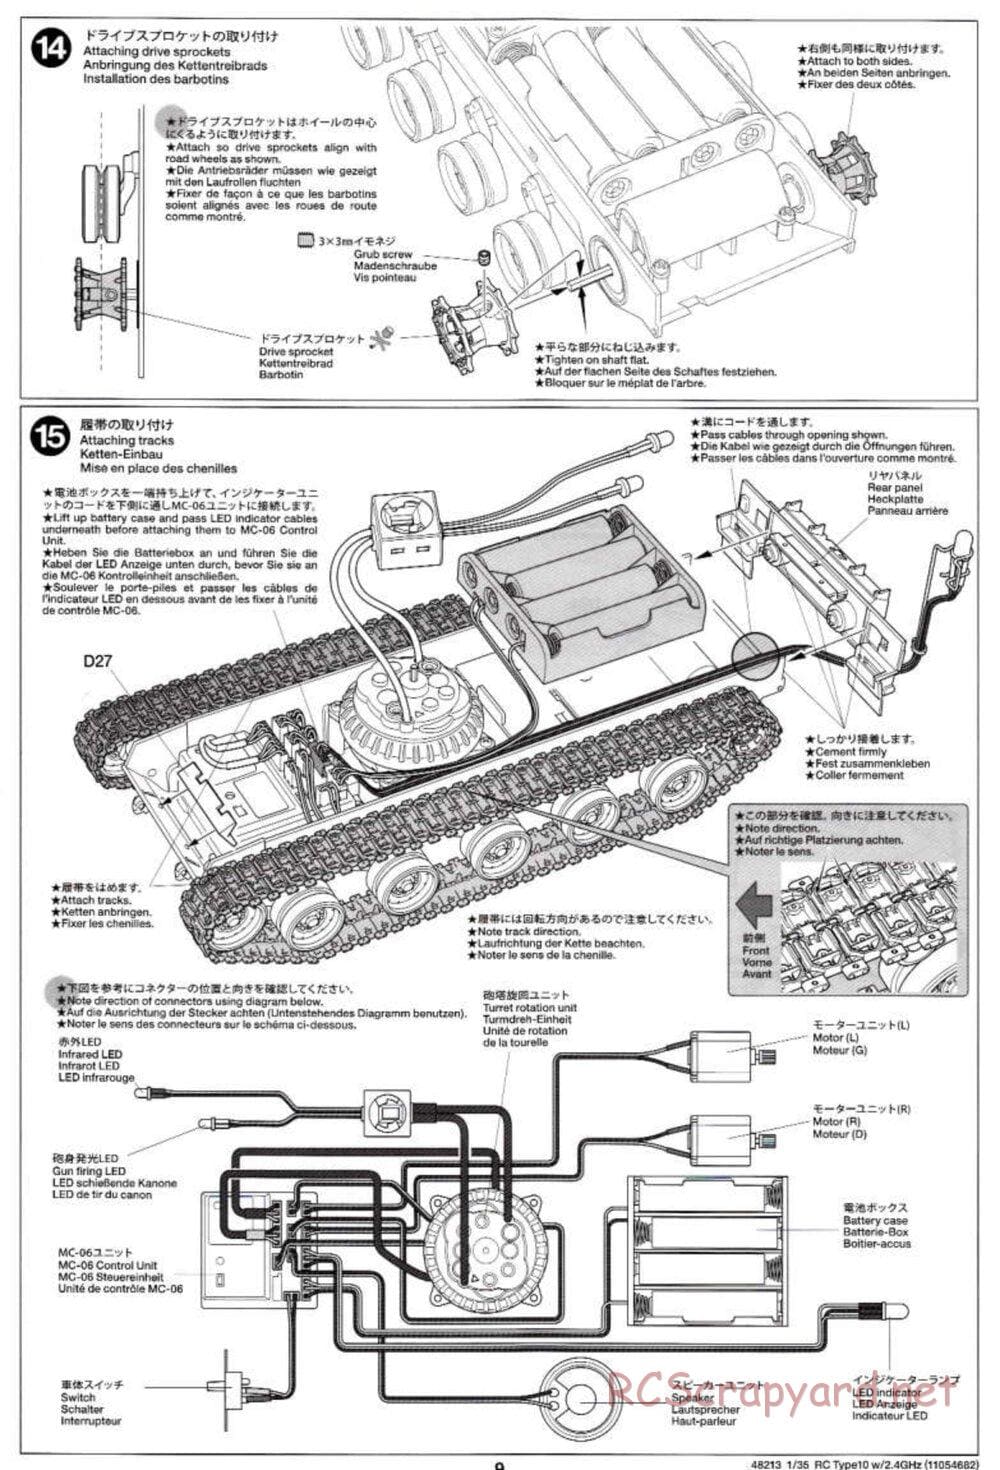 Tamiya - JGSDF Type 10 Tank - 1/35 Scale Chassis - Manual - Page 9